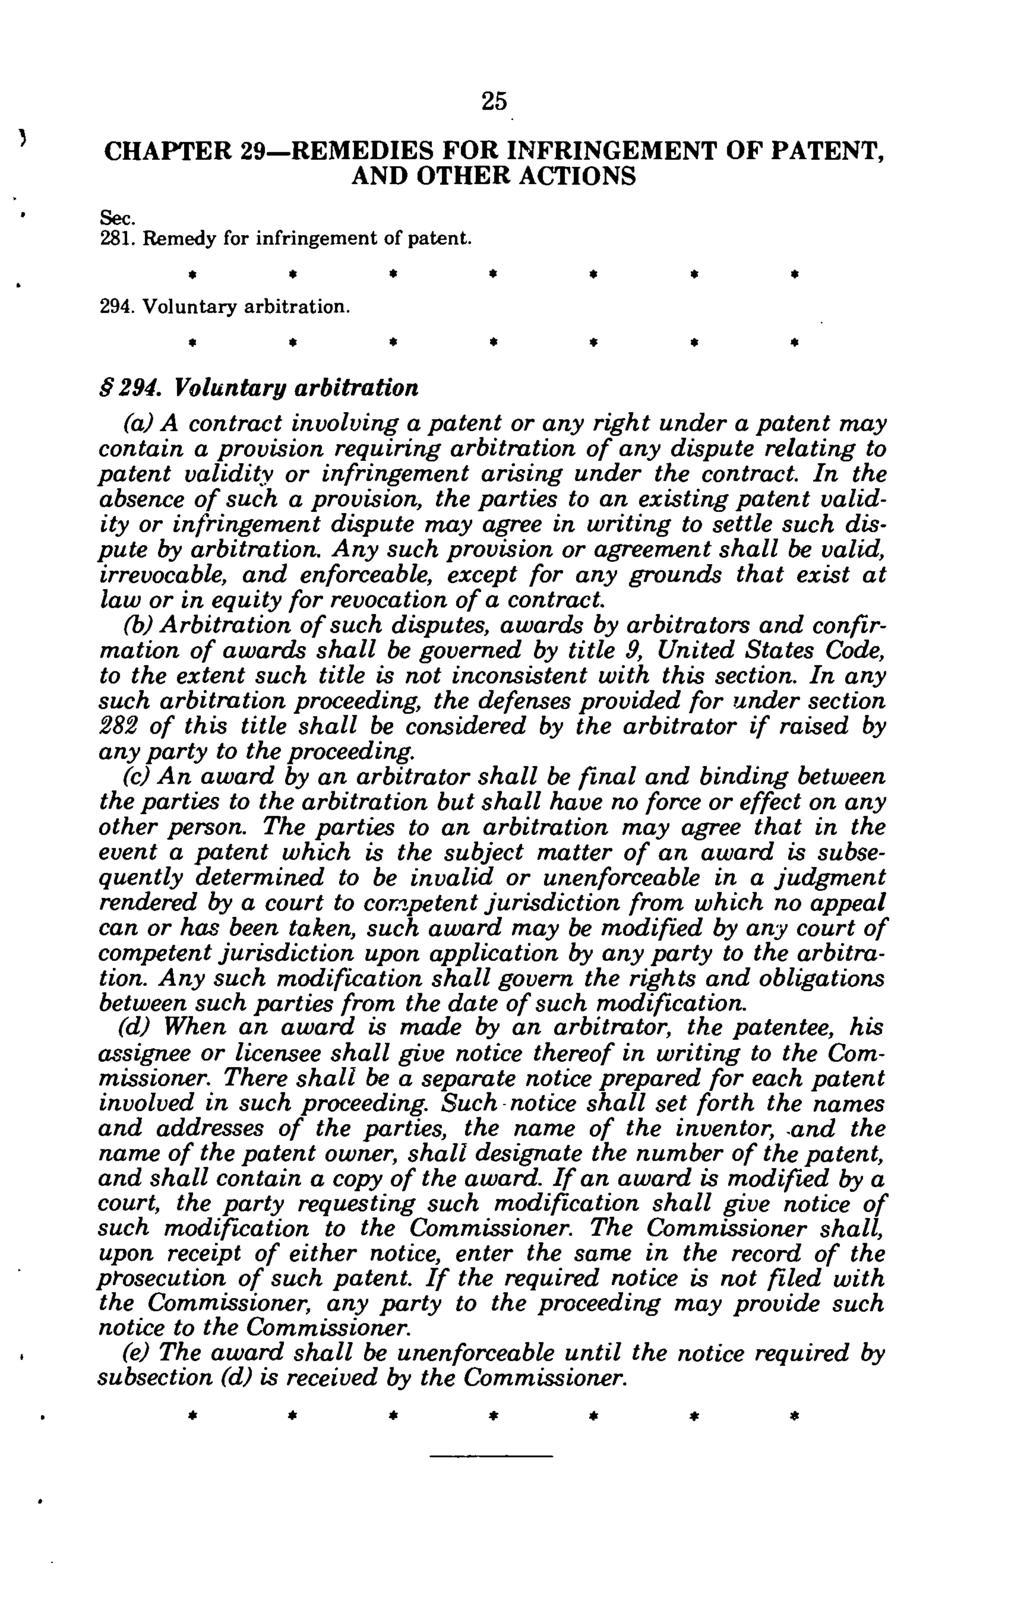 25 CHAPTER 29 REMEDIES FOR INFRINGEMENT OF PATENT, AND OTHER ACTIONS Oct. 281. Remedy for infringement of patent. 294.